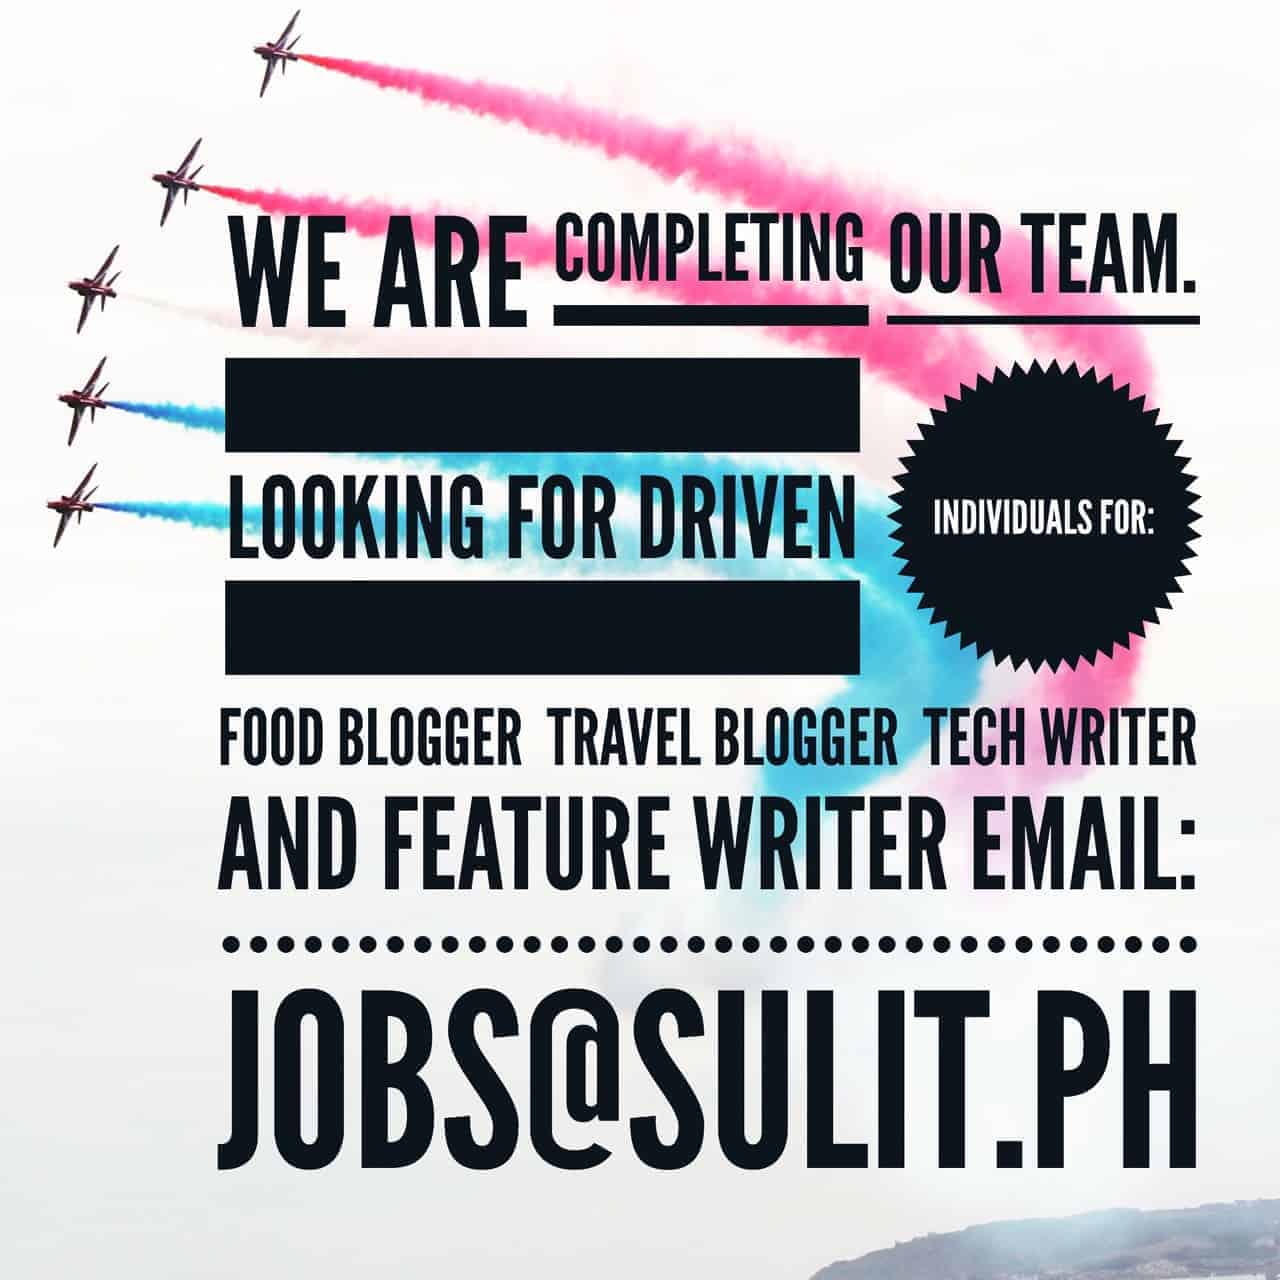 Technology writers and bloggers in the Philippines are welcome to apply for jobs at Sulit, focusing on topics related to food and travel.